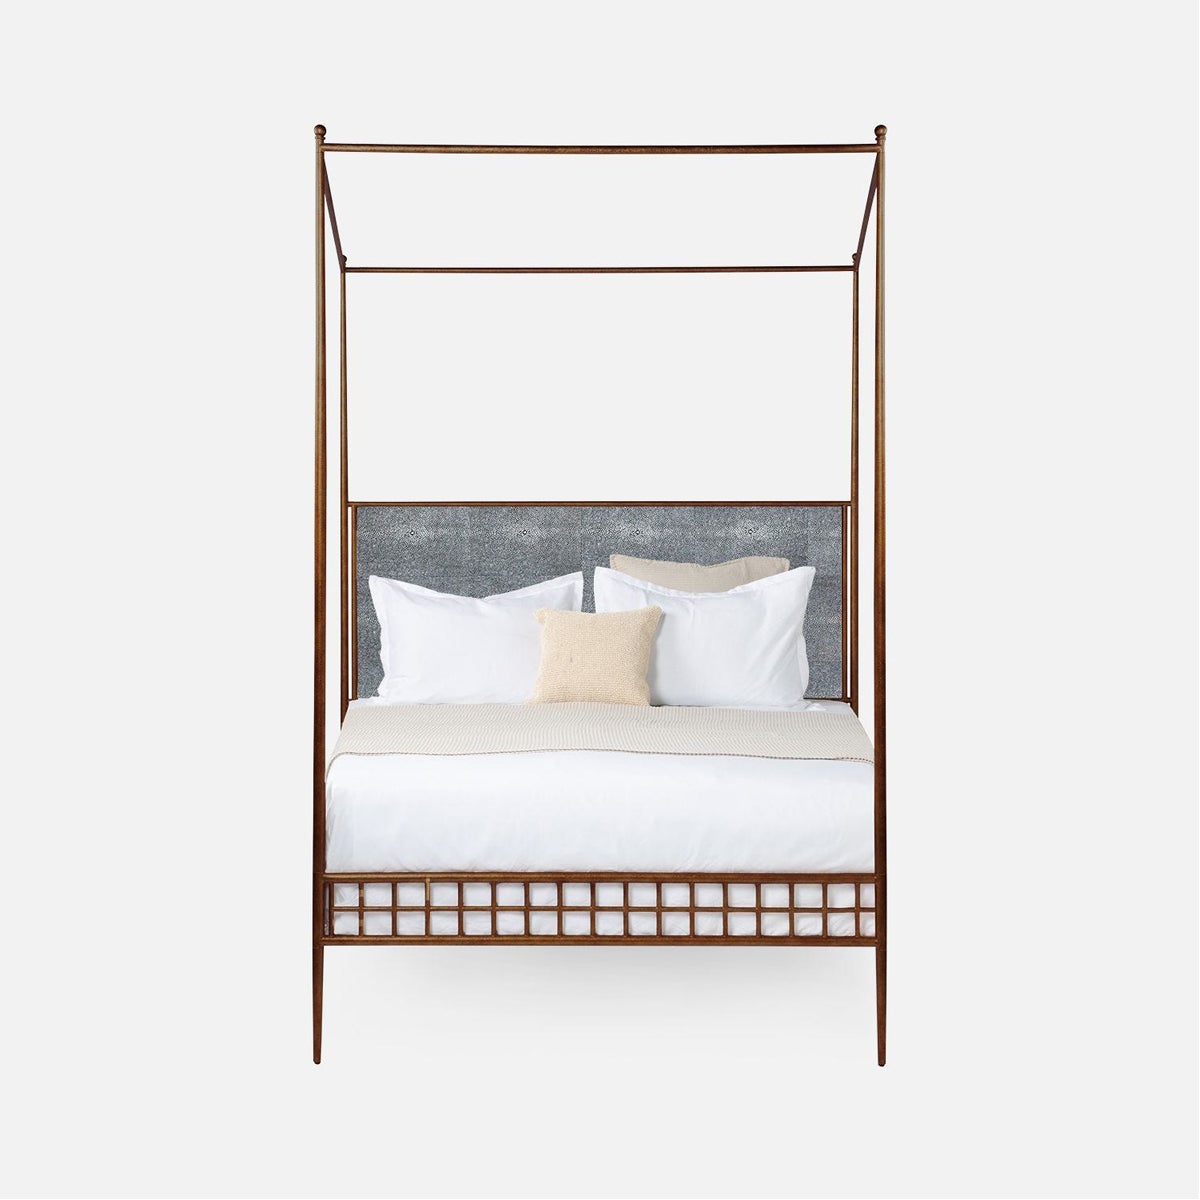 Made Goods Hamilton Textured Iron Canopy Bed in Clyde Fabric